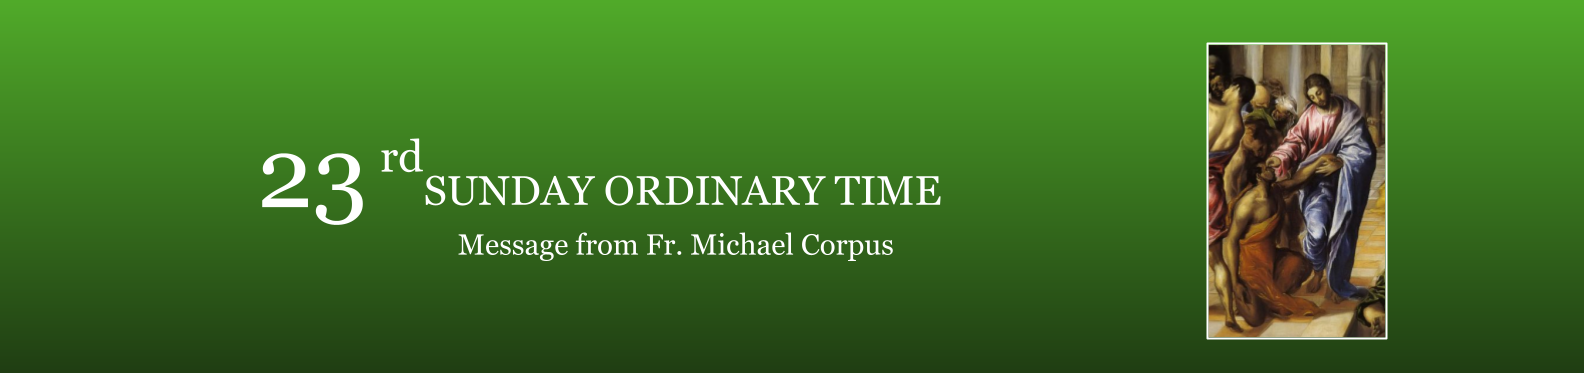 23rd Sunday Ordinary Time Message from Fr. Michael Corpus